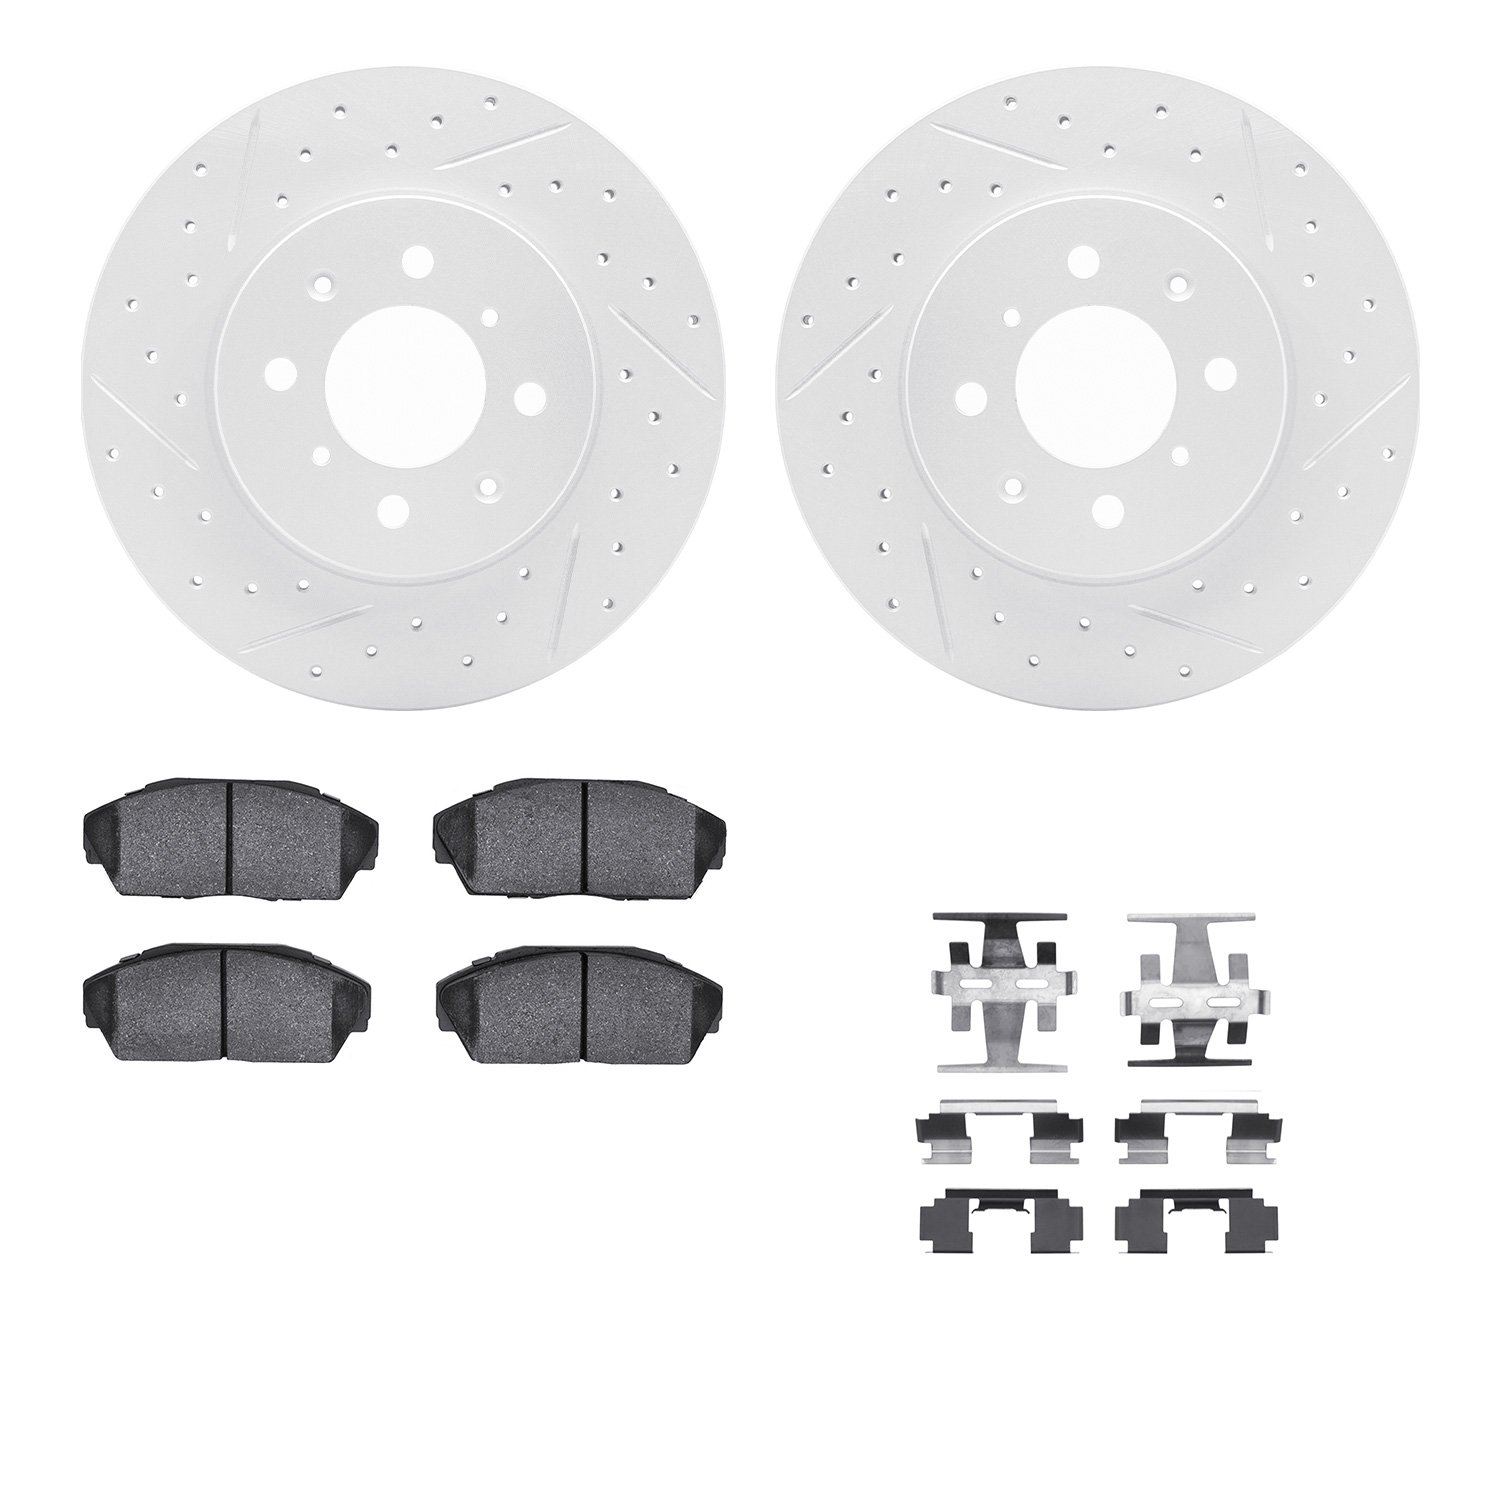 2512-59007 Geoperformance Drilled/Slotted Rotors w/5000 Advanced Brake Pads Kit & Hardware, 1990-1993 Acura/Honda, Position: Fro